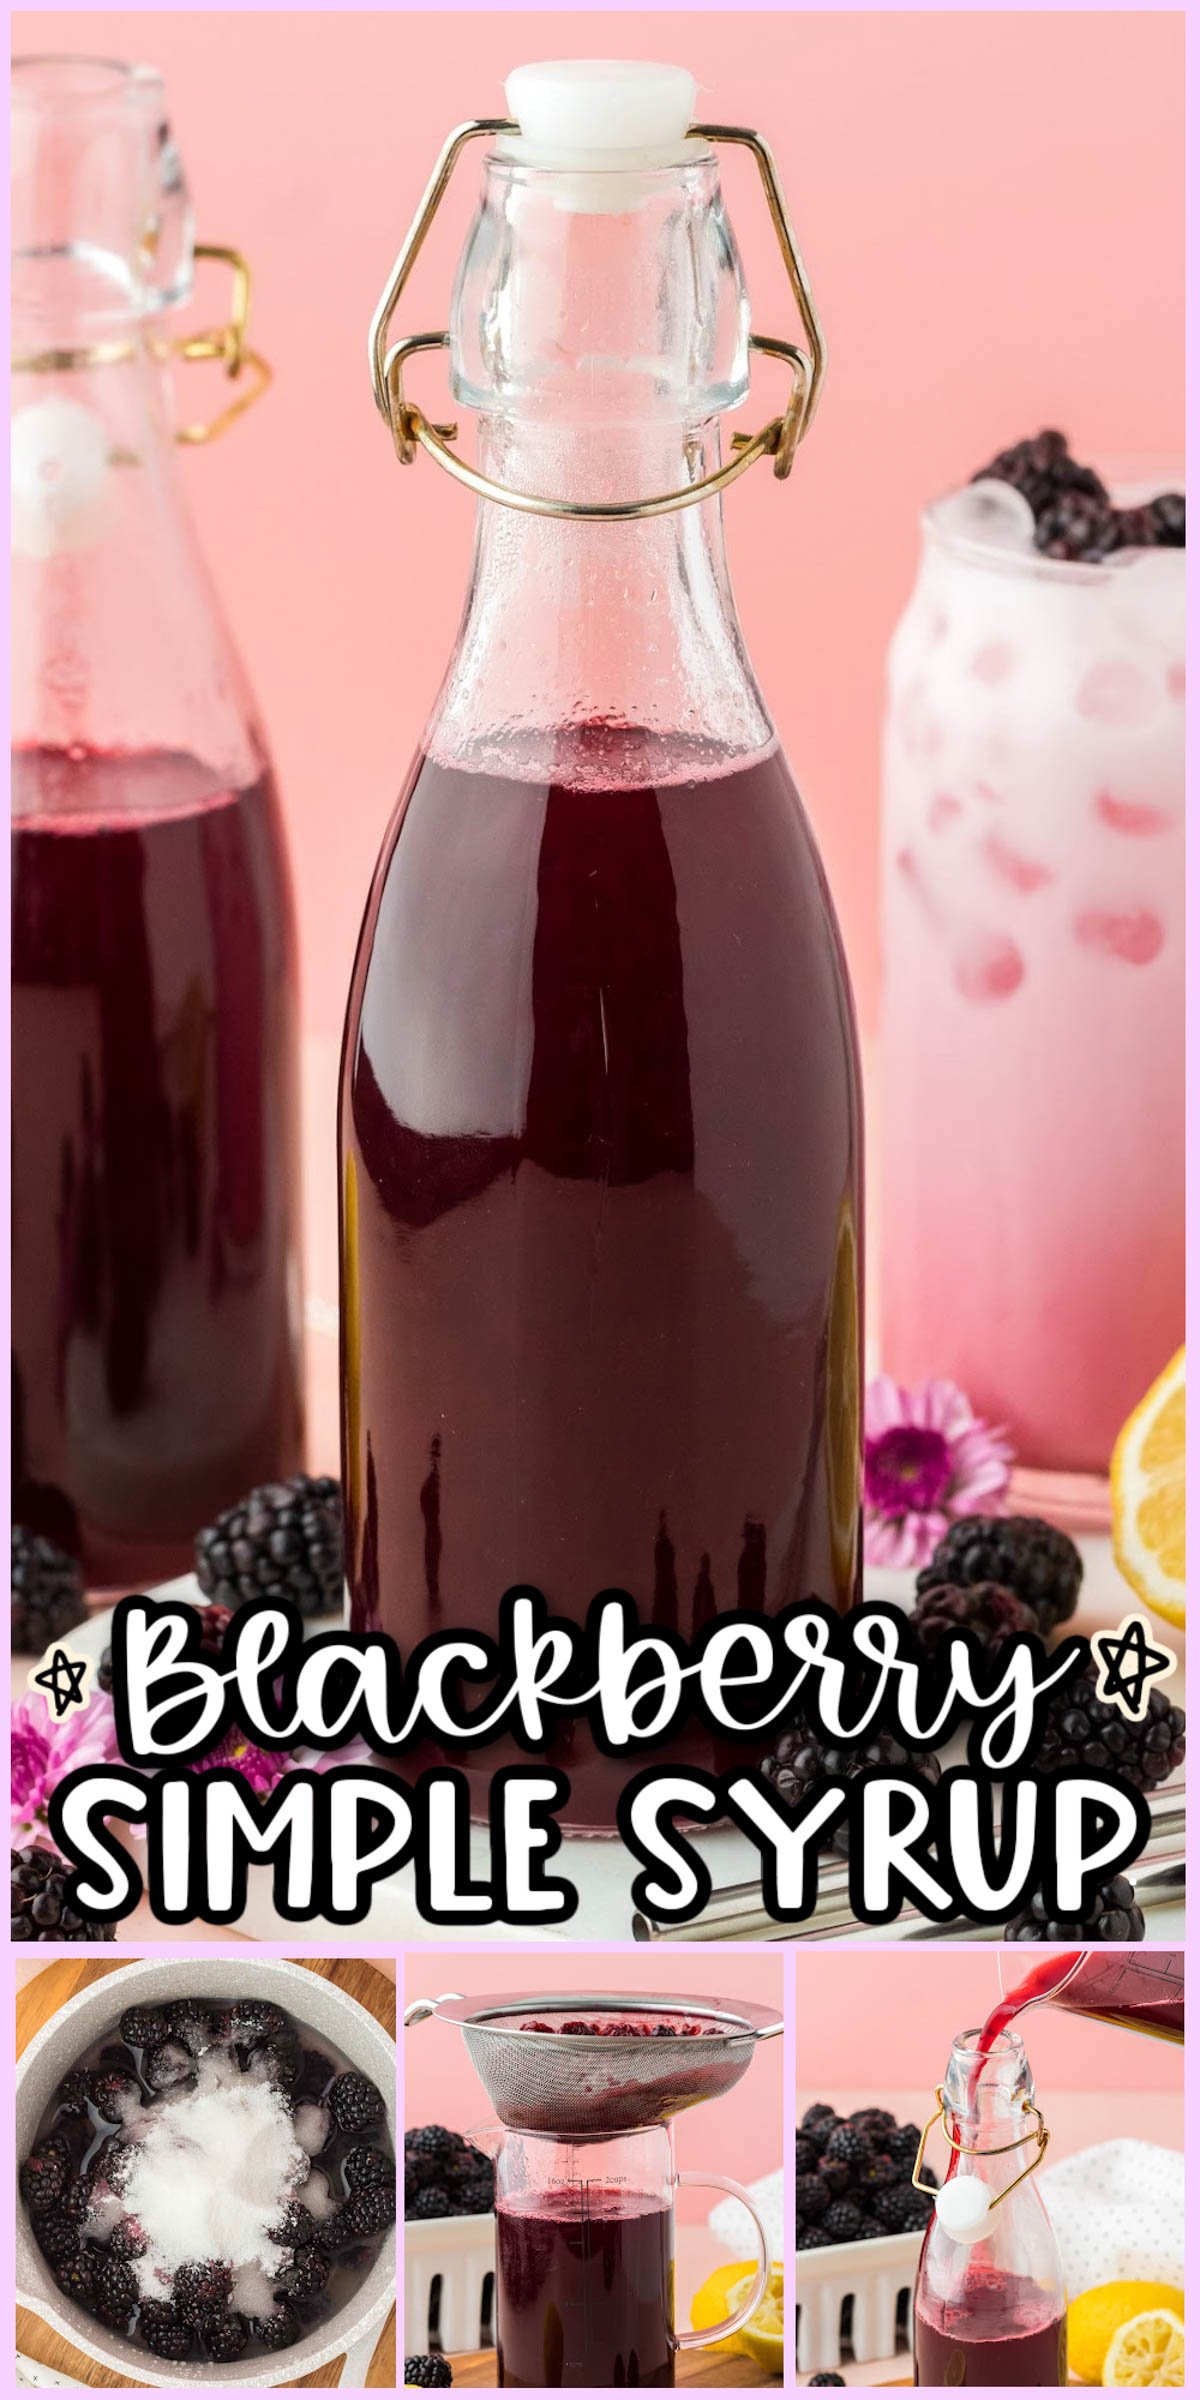 This Blackberry Simple Syrup is the perfect flavor addition to cocktails and homemade sodas! Made with only 4 ingredients in just 30 minutes! via @sugarandsoulco